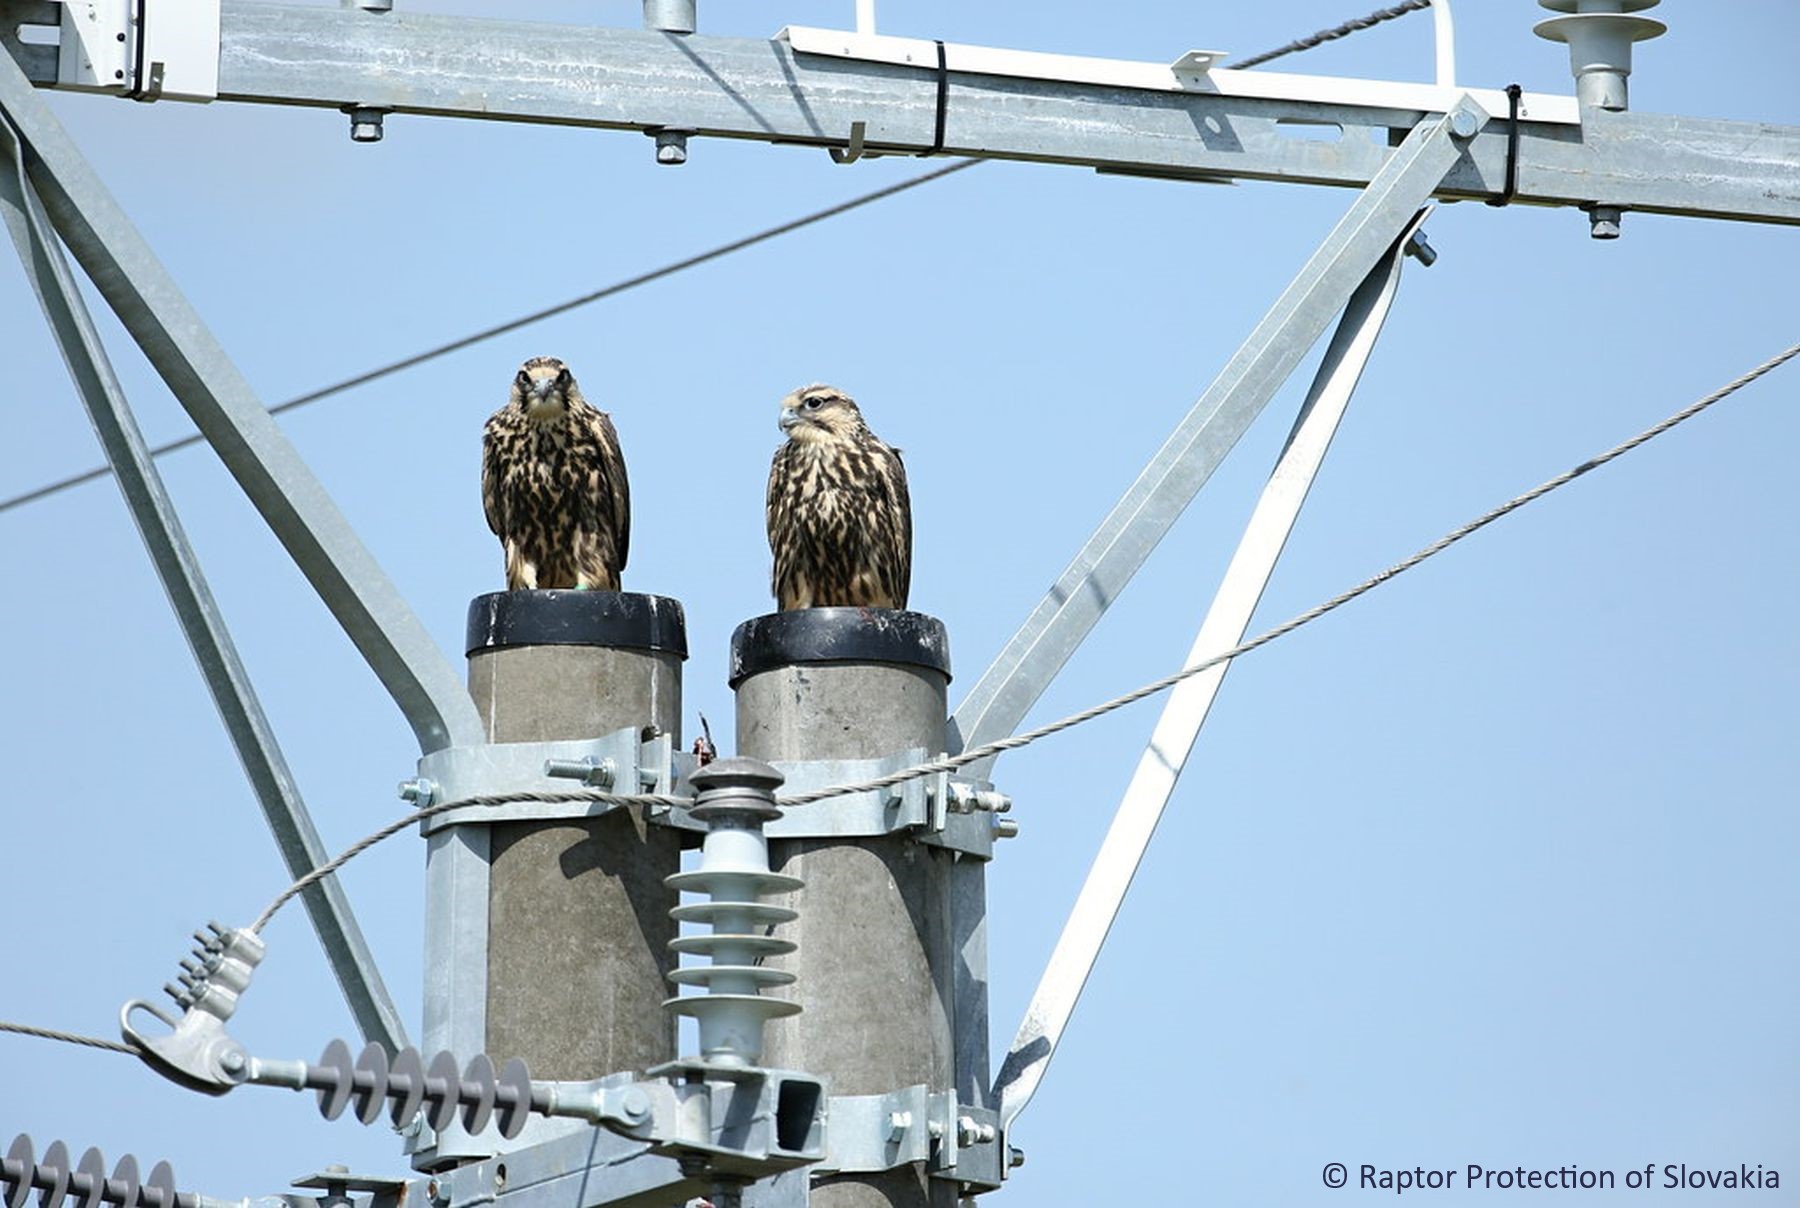 Pair of falcons sitting on the dangerous utility poles